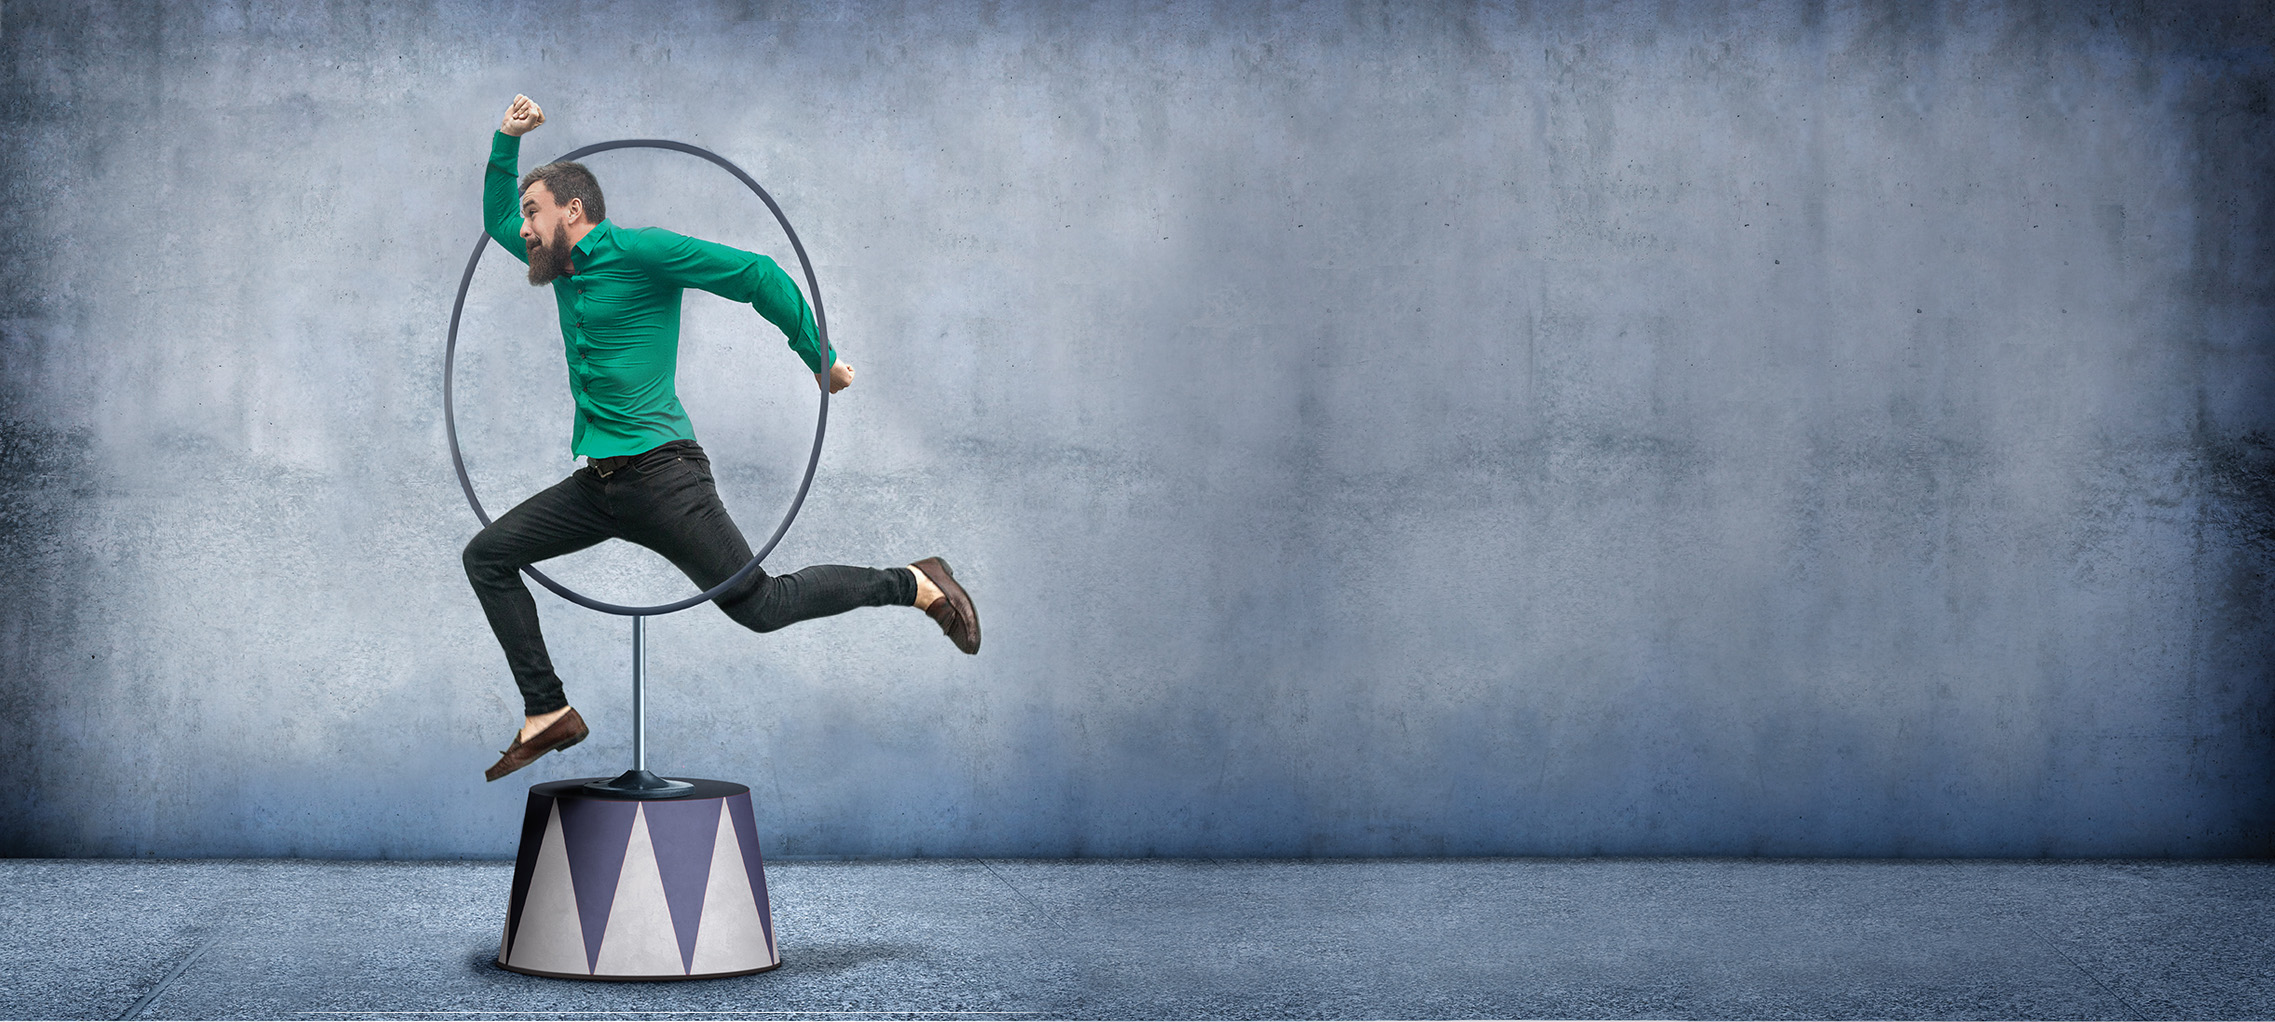 A businessman jumps through a hoop - the concept of a businessman doing whatever is necessary to get the job done.